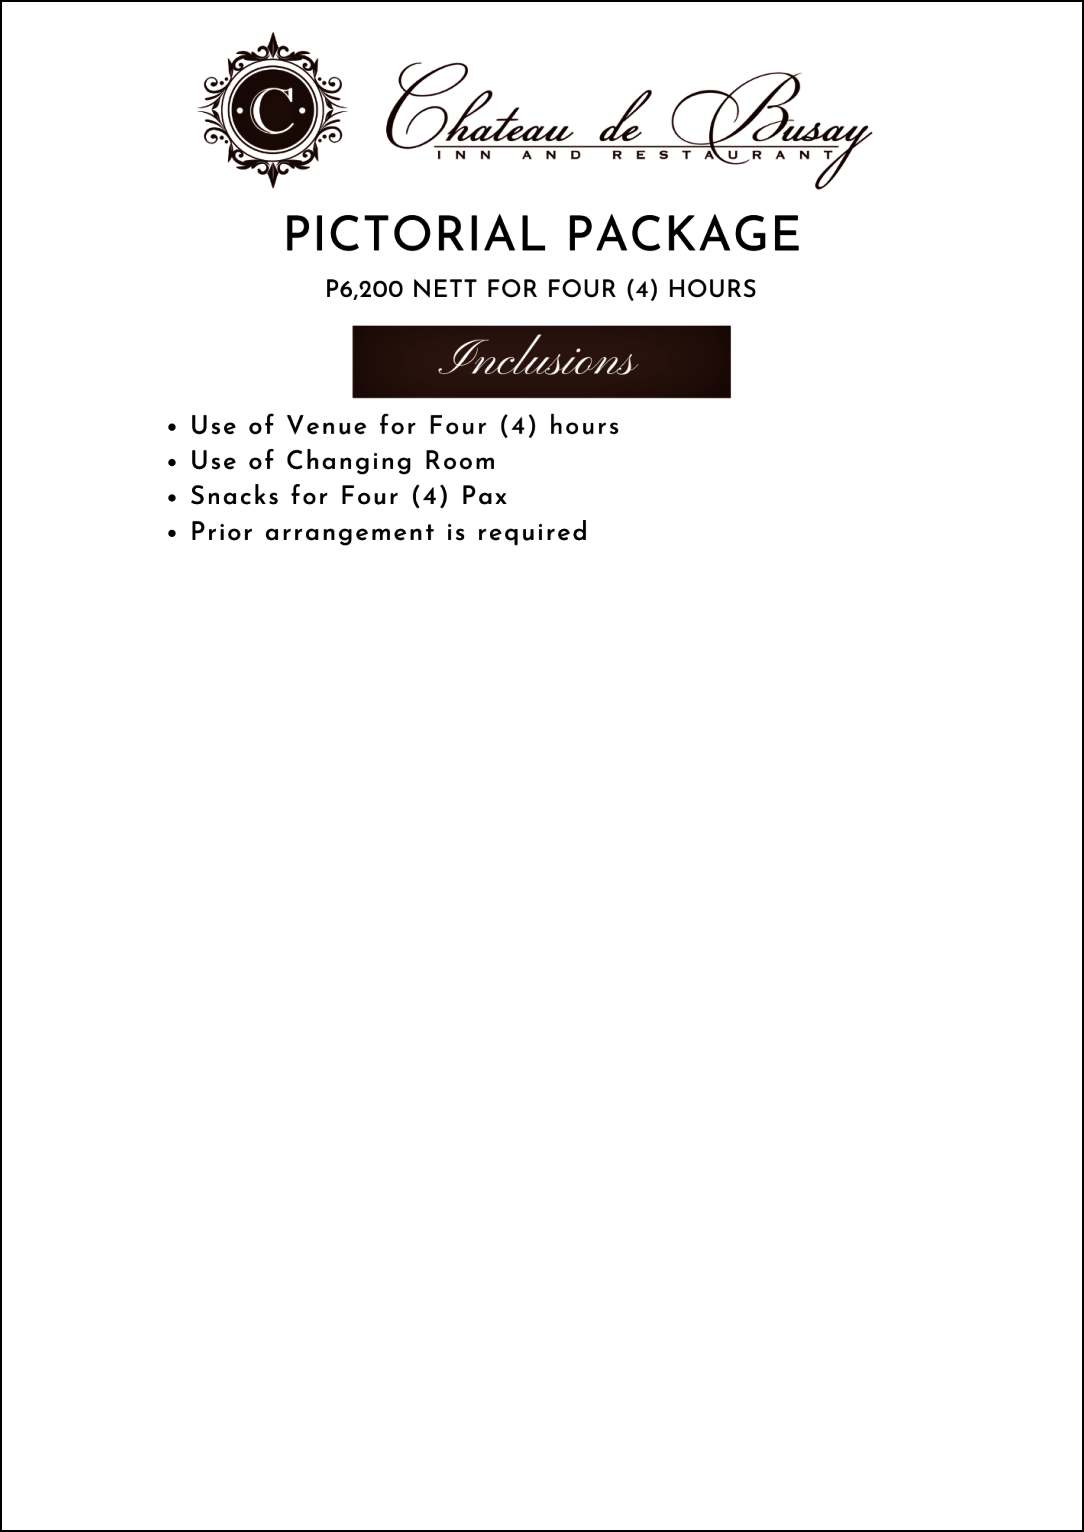 PICTORIA PACKAGE